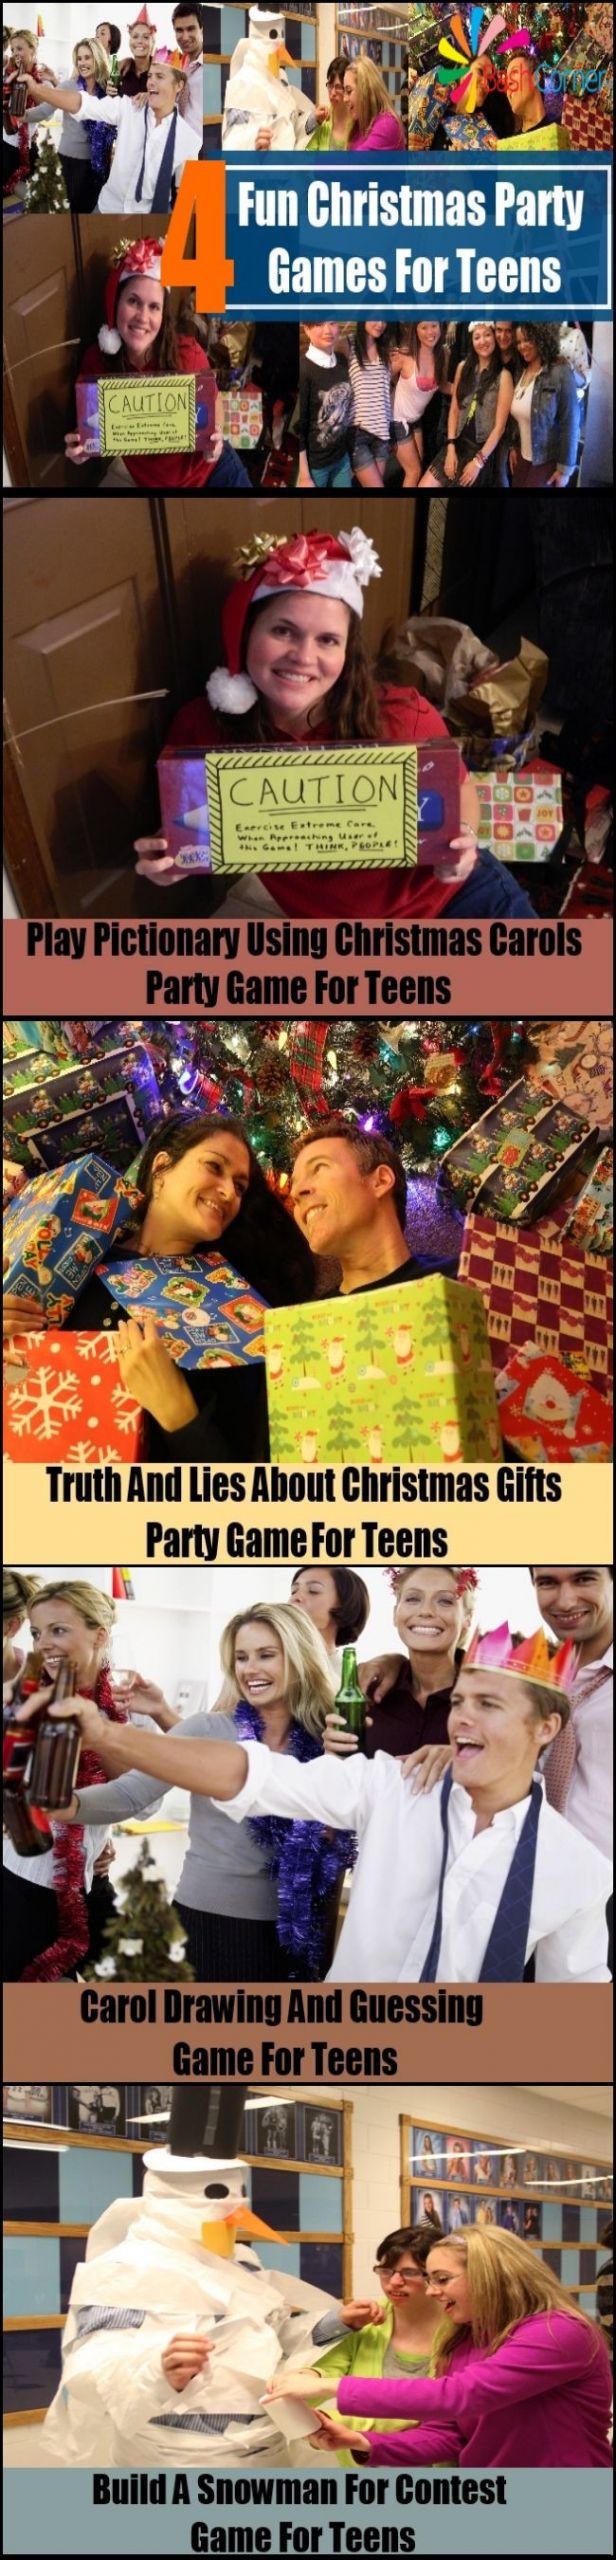 Fun Staff Christmas Party Ideas
 Download free Fun Games To Play At A Staff Christmas Party